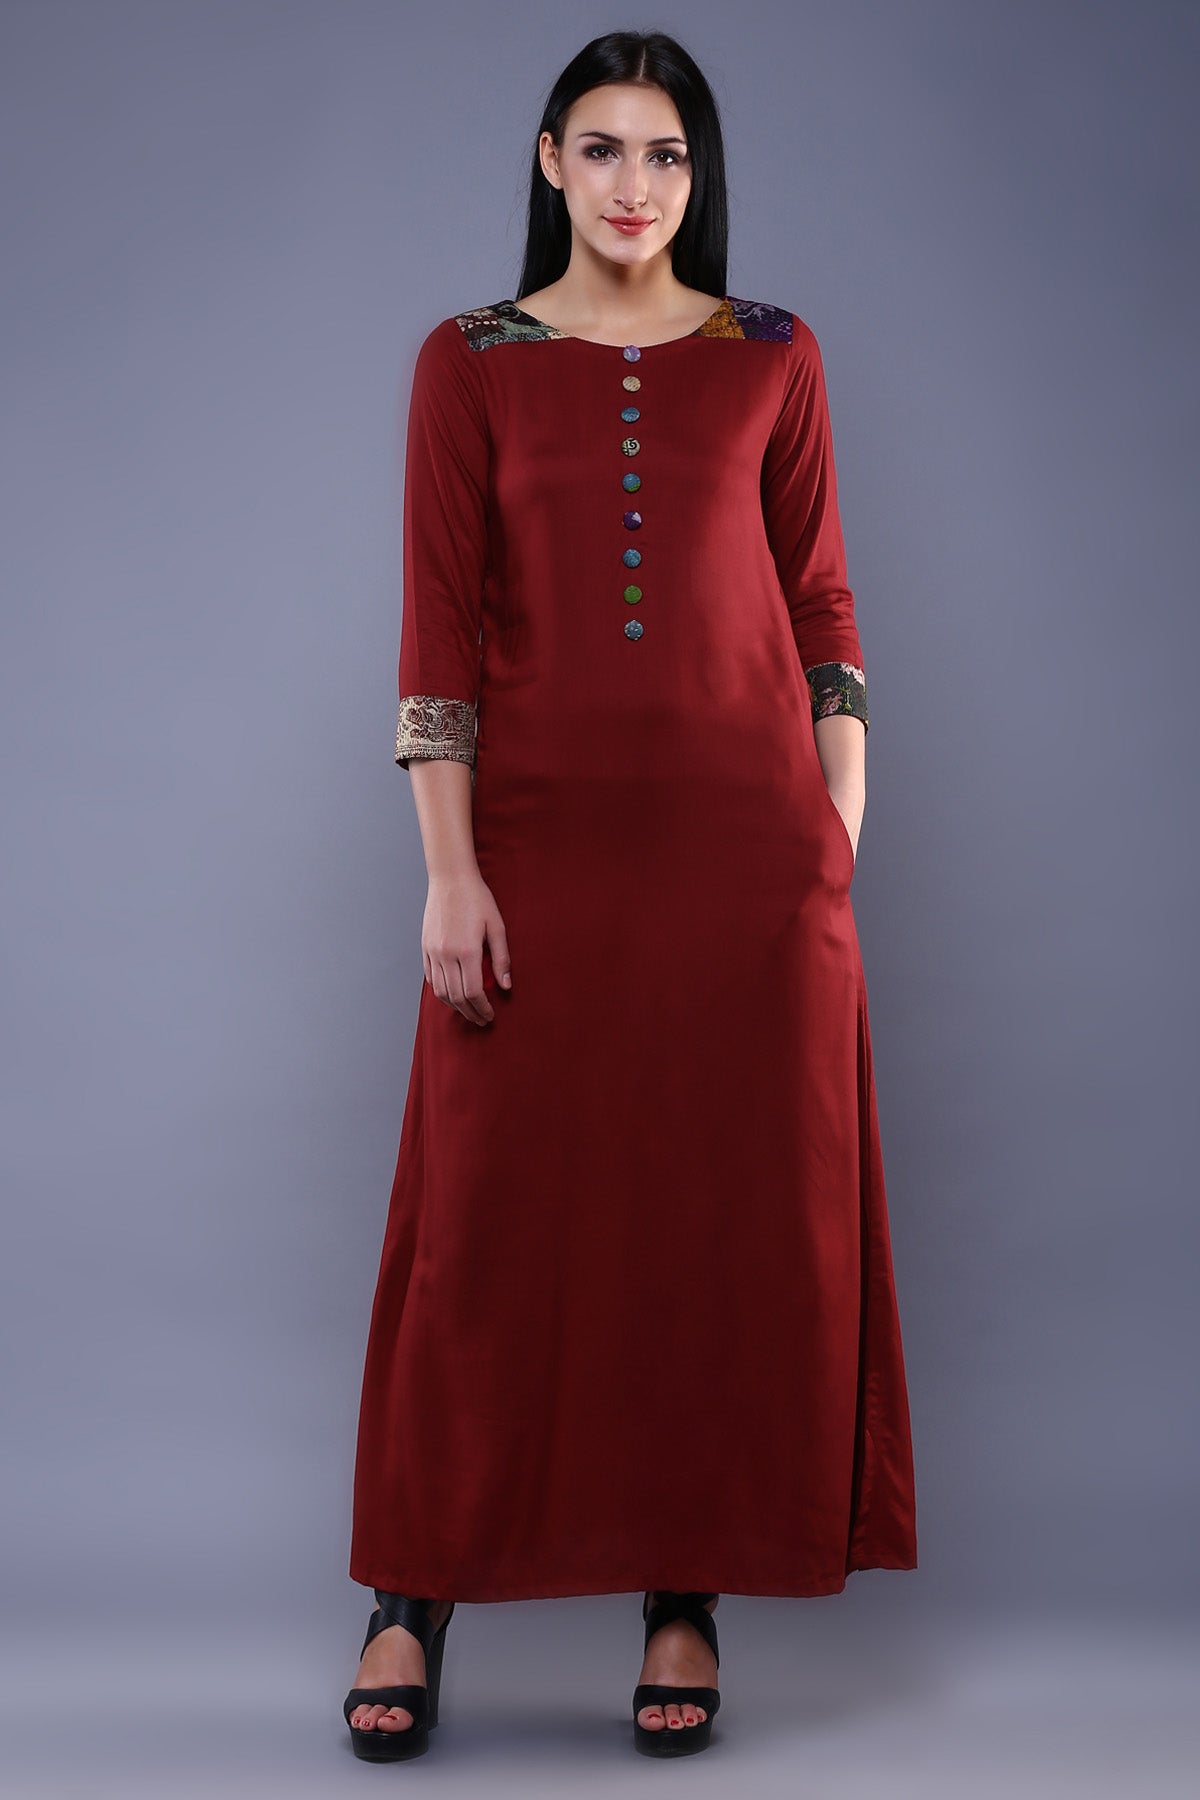 Buy Simply Kitsch Maroon Dress for Women online available at ScrollnShops